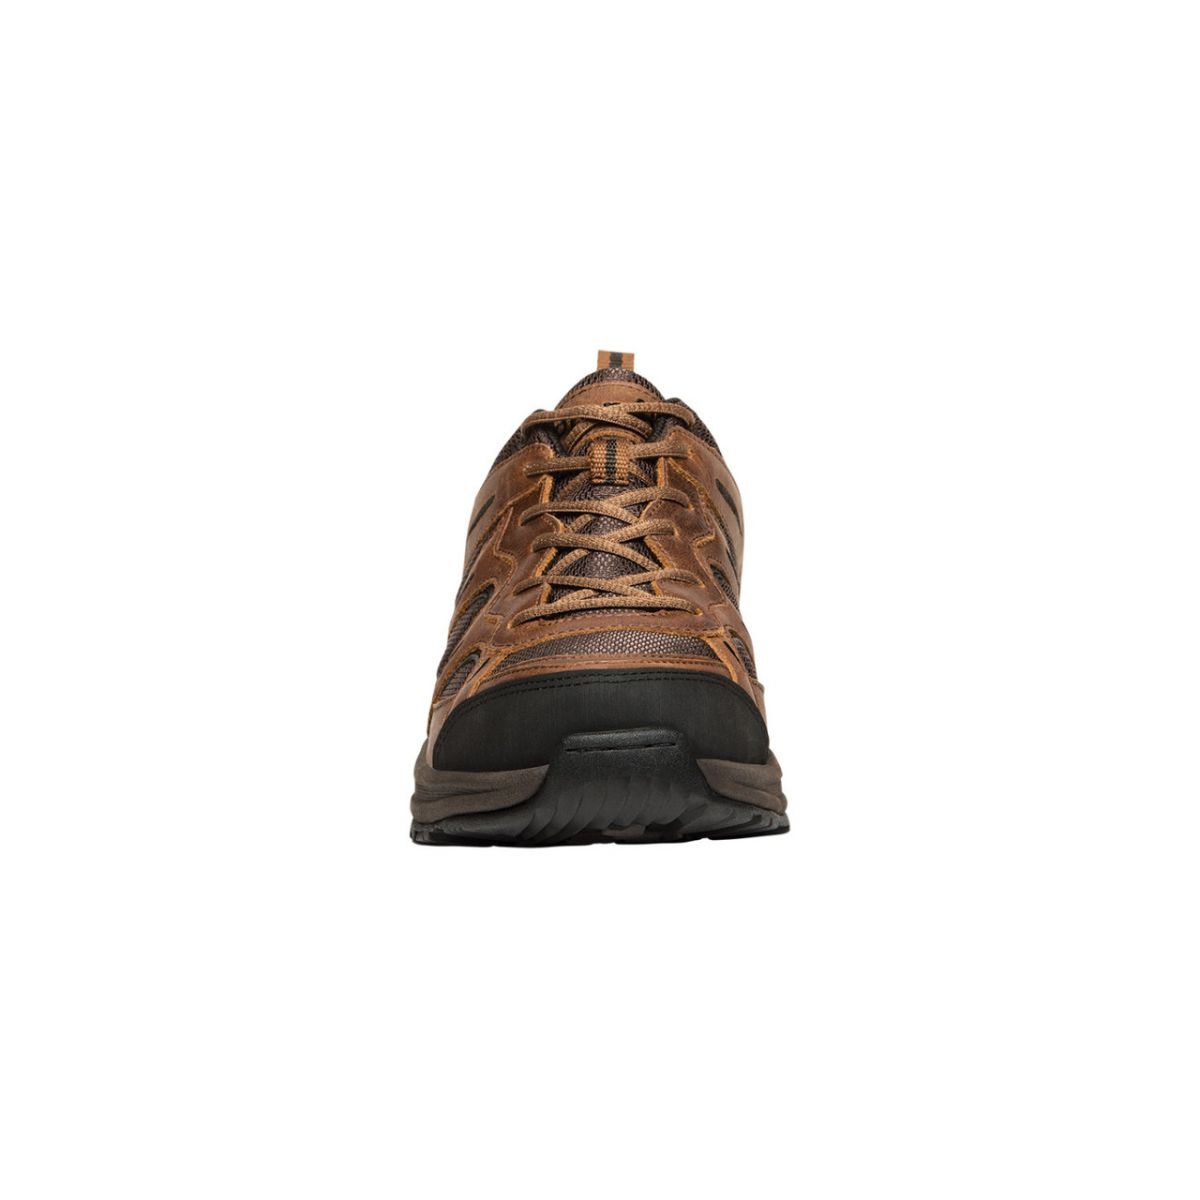 Propet Men's Connelly Hiking Shoe Brown - M5503BR BROWN - BROWN, 11.5-D